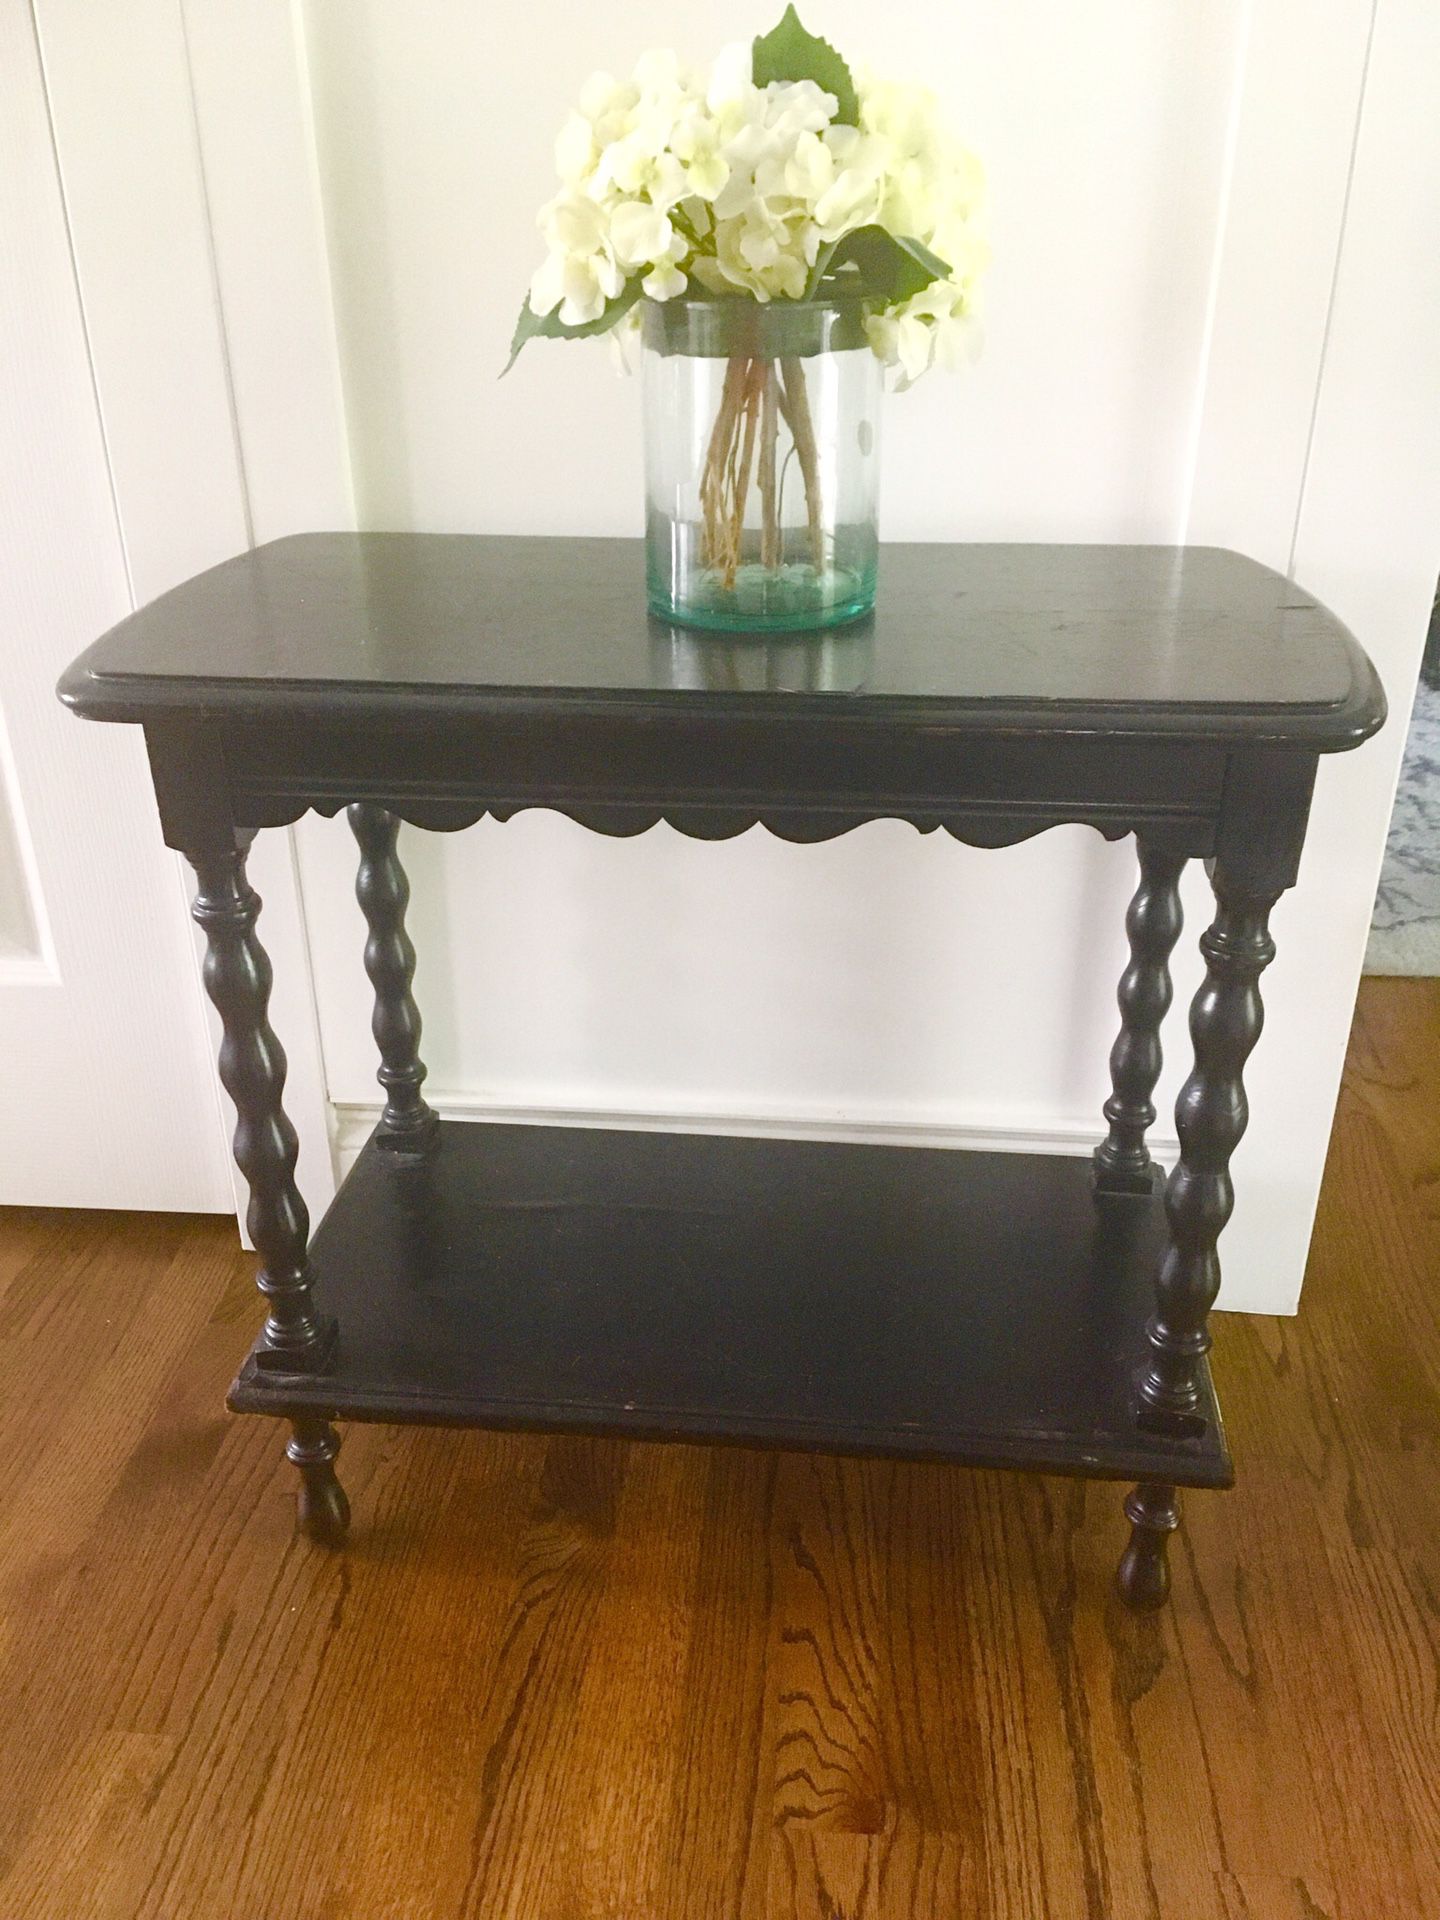 Antique Spindle black leg 2 tier entry or end table 26”w x 14”d x 23.5”tall